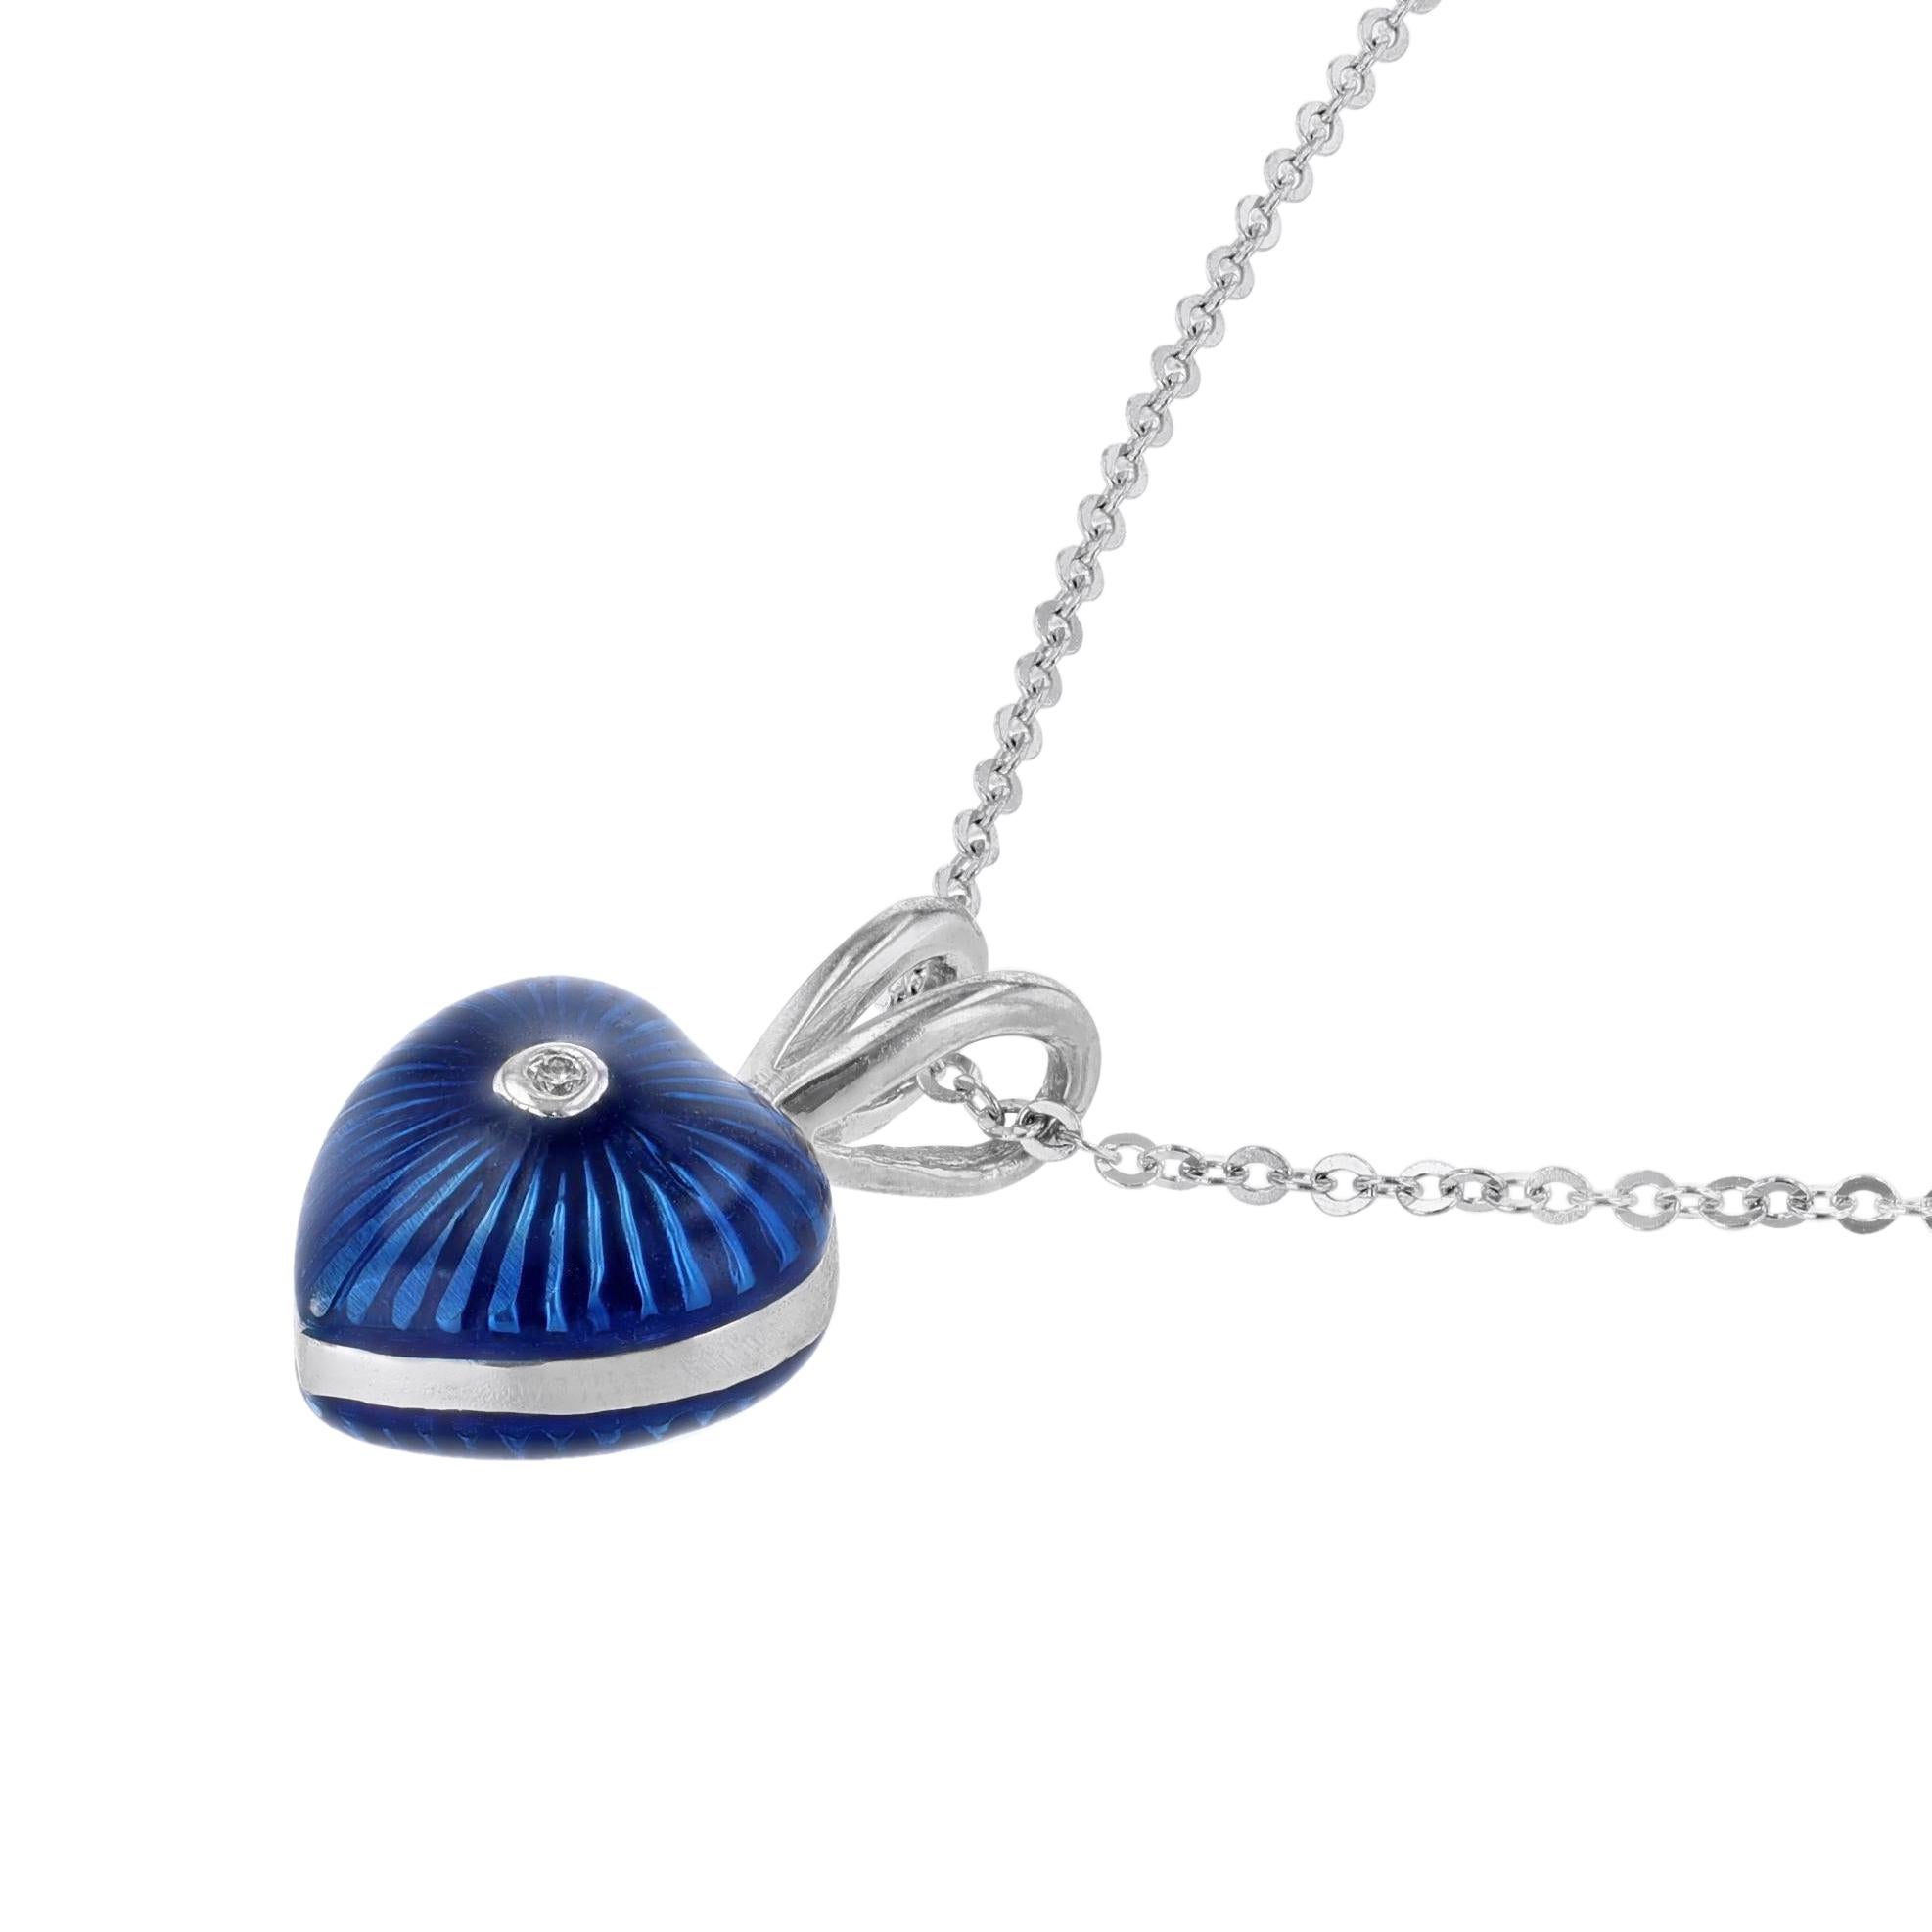 This necklace is made in 18K white gold and blue enamel. It features a heart pendant with a 0.01 carat center diamond.